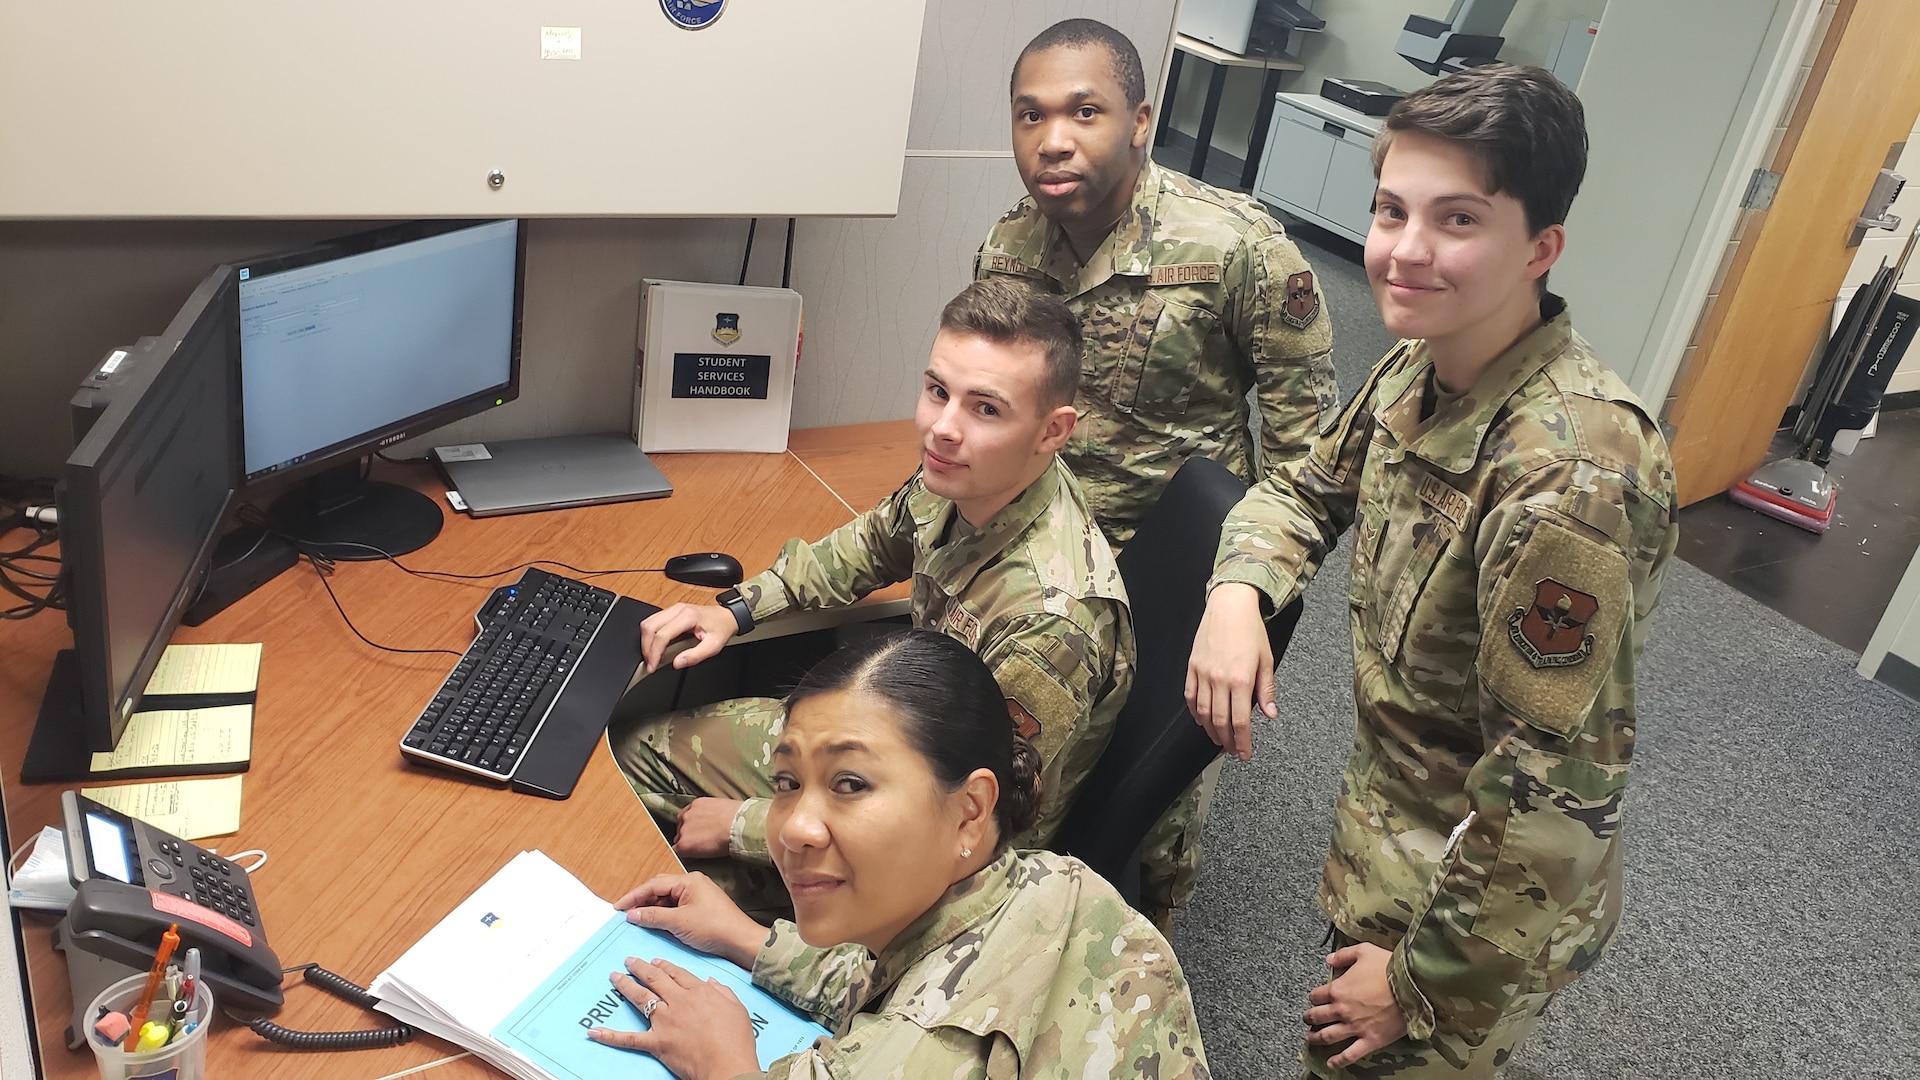 Members of the CCAF Student Services staff take a break for the camera while processing transcripts in the new electronic system. Members include (front to back): MSgt Ellainne Bay—Flight Chief; A1C Megan Dillingham, A1C Paul Phillips, and A1C Tywayne Reynolds. Not pictured is A1C Nathaniel Hernandez